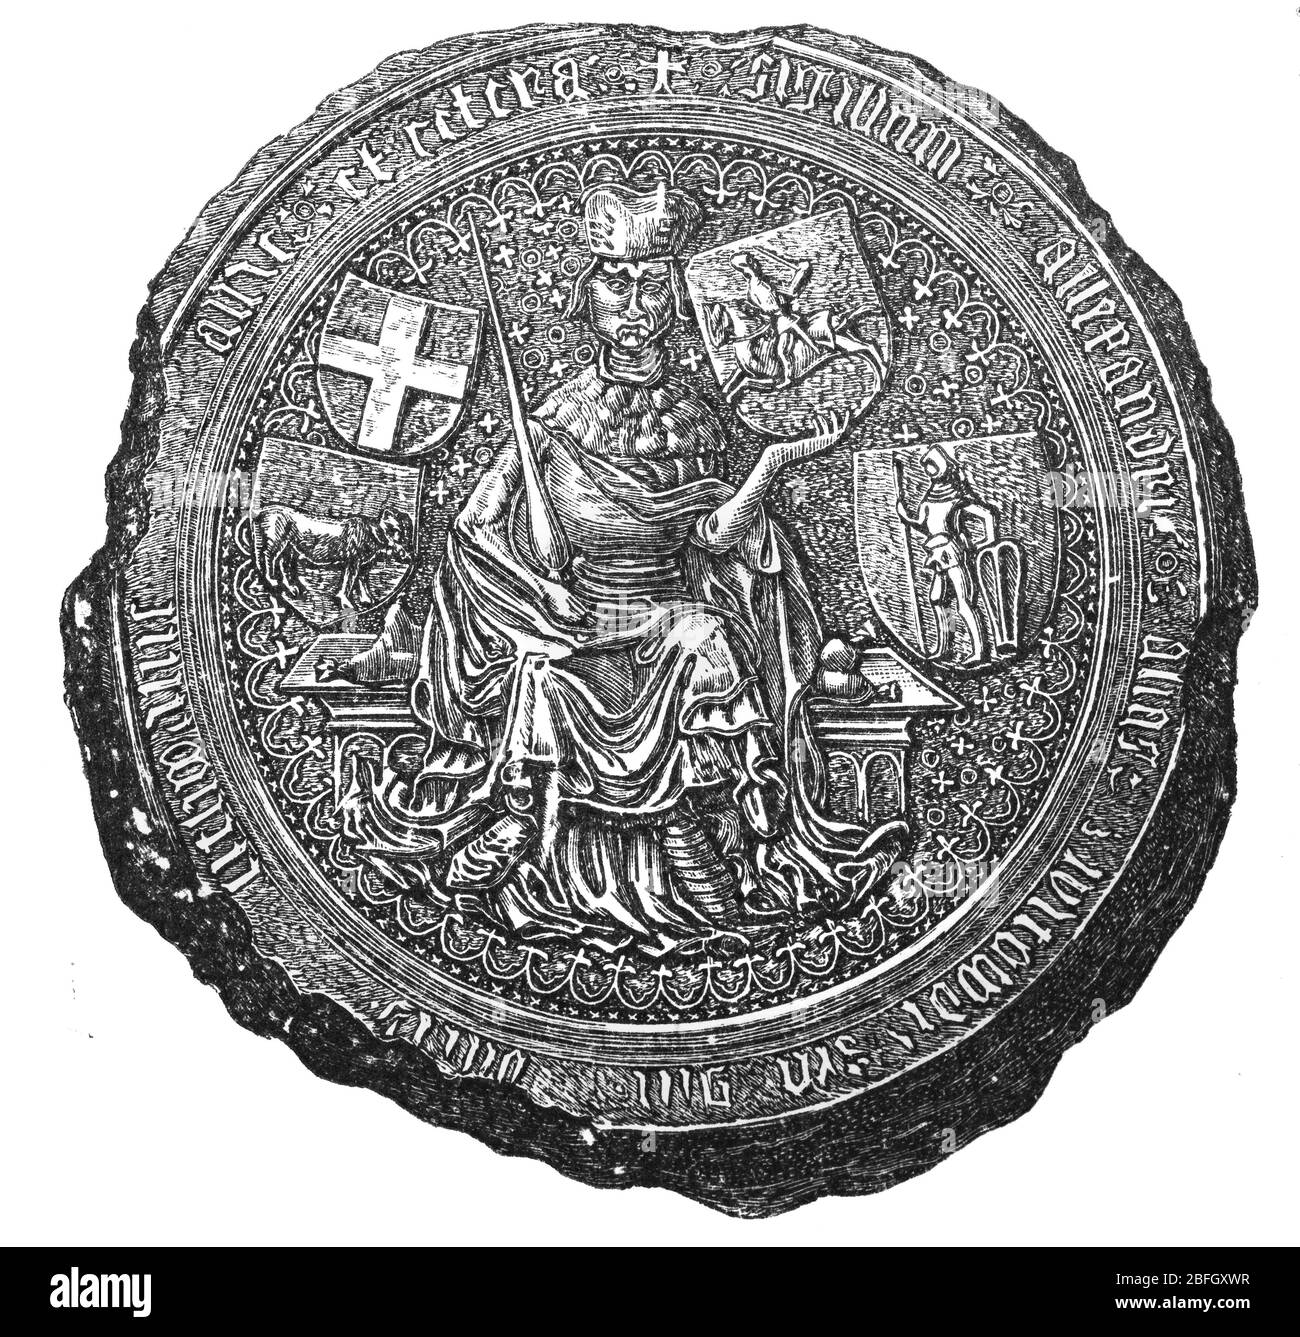 Seal of Vytautas the Great, Grand Duke of Lithuania, 15th century, illustration from book dated 1916 Stock Photo